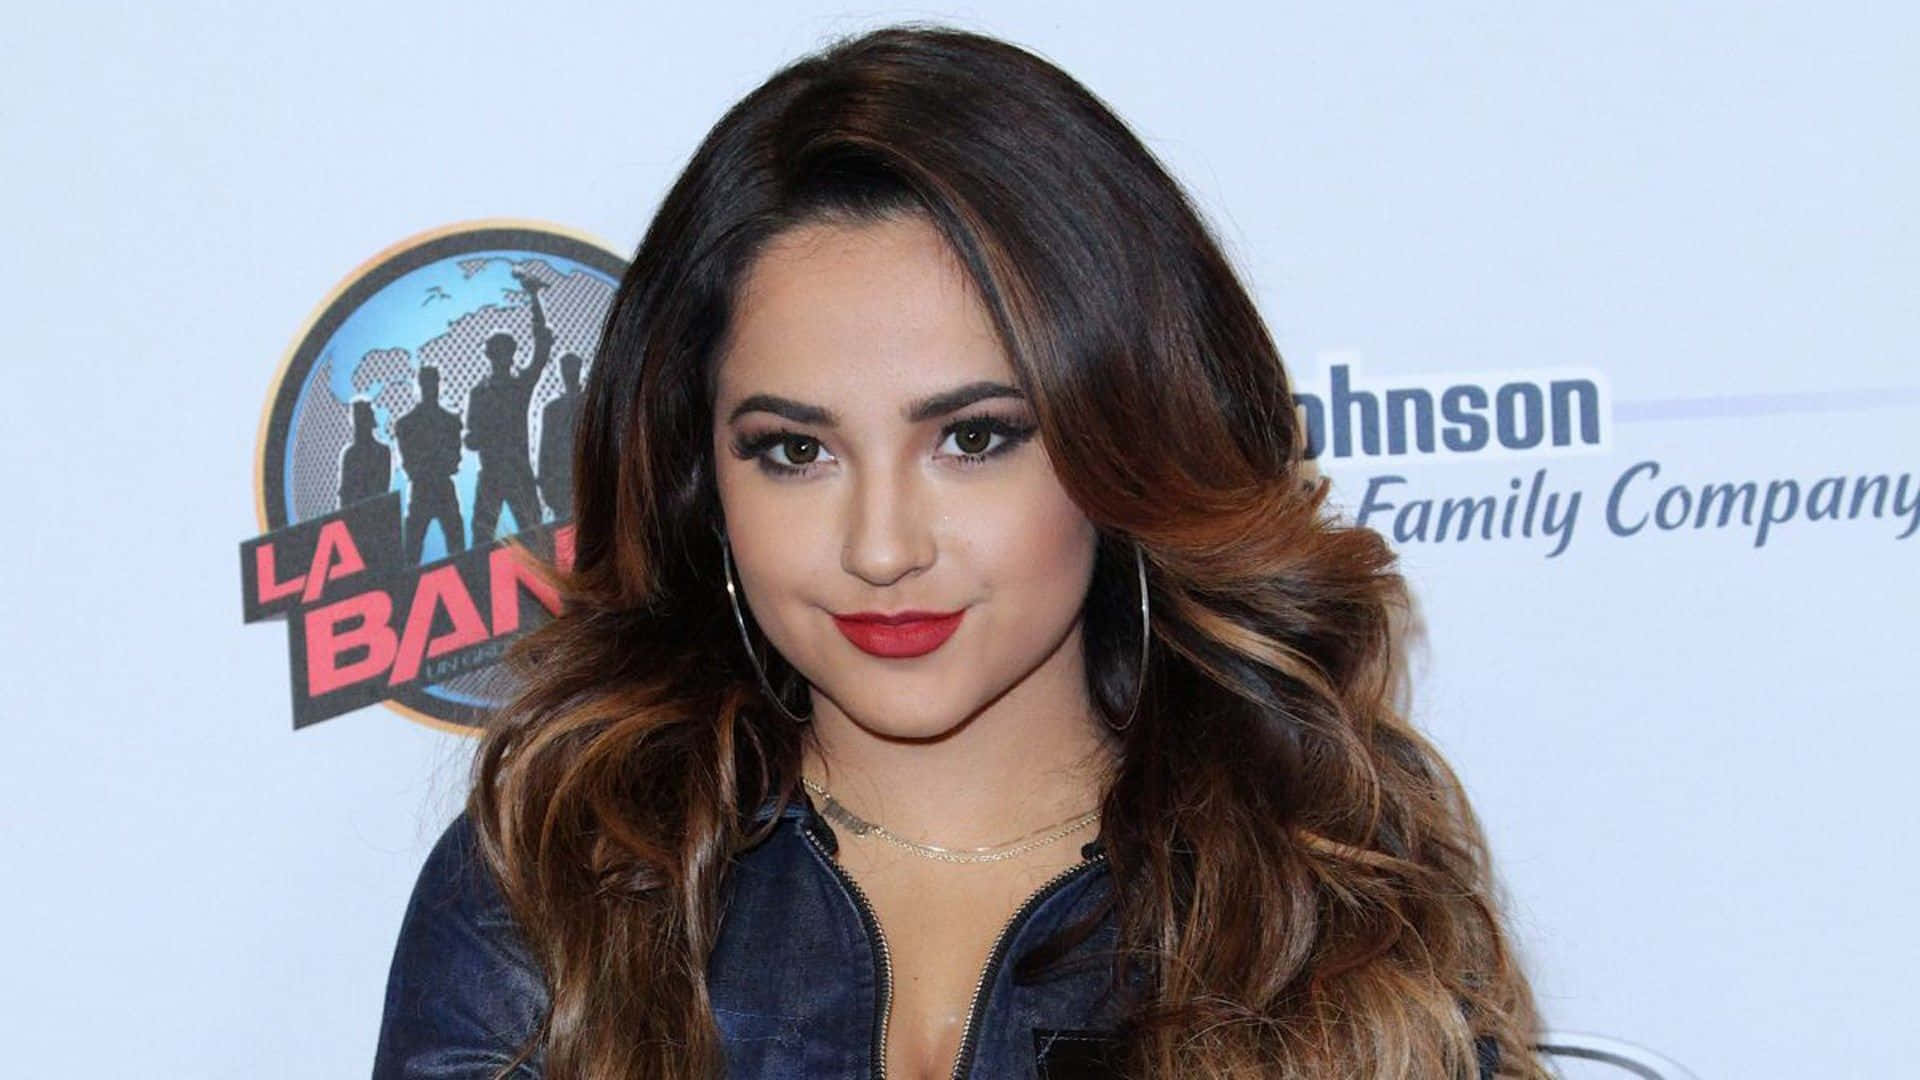 Singer and actress Becky G posing for the camera.